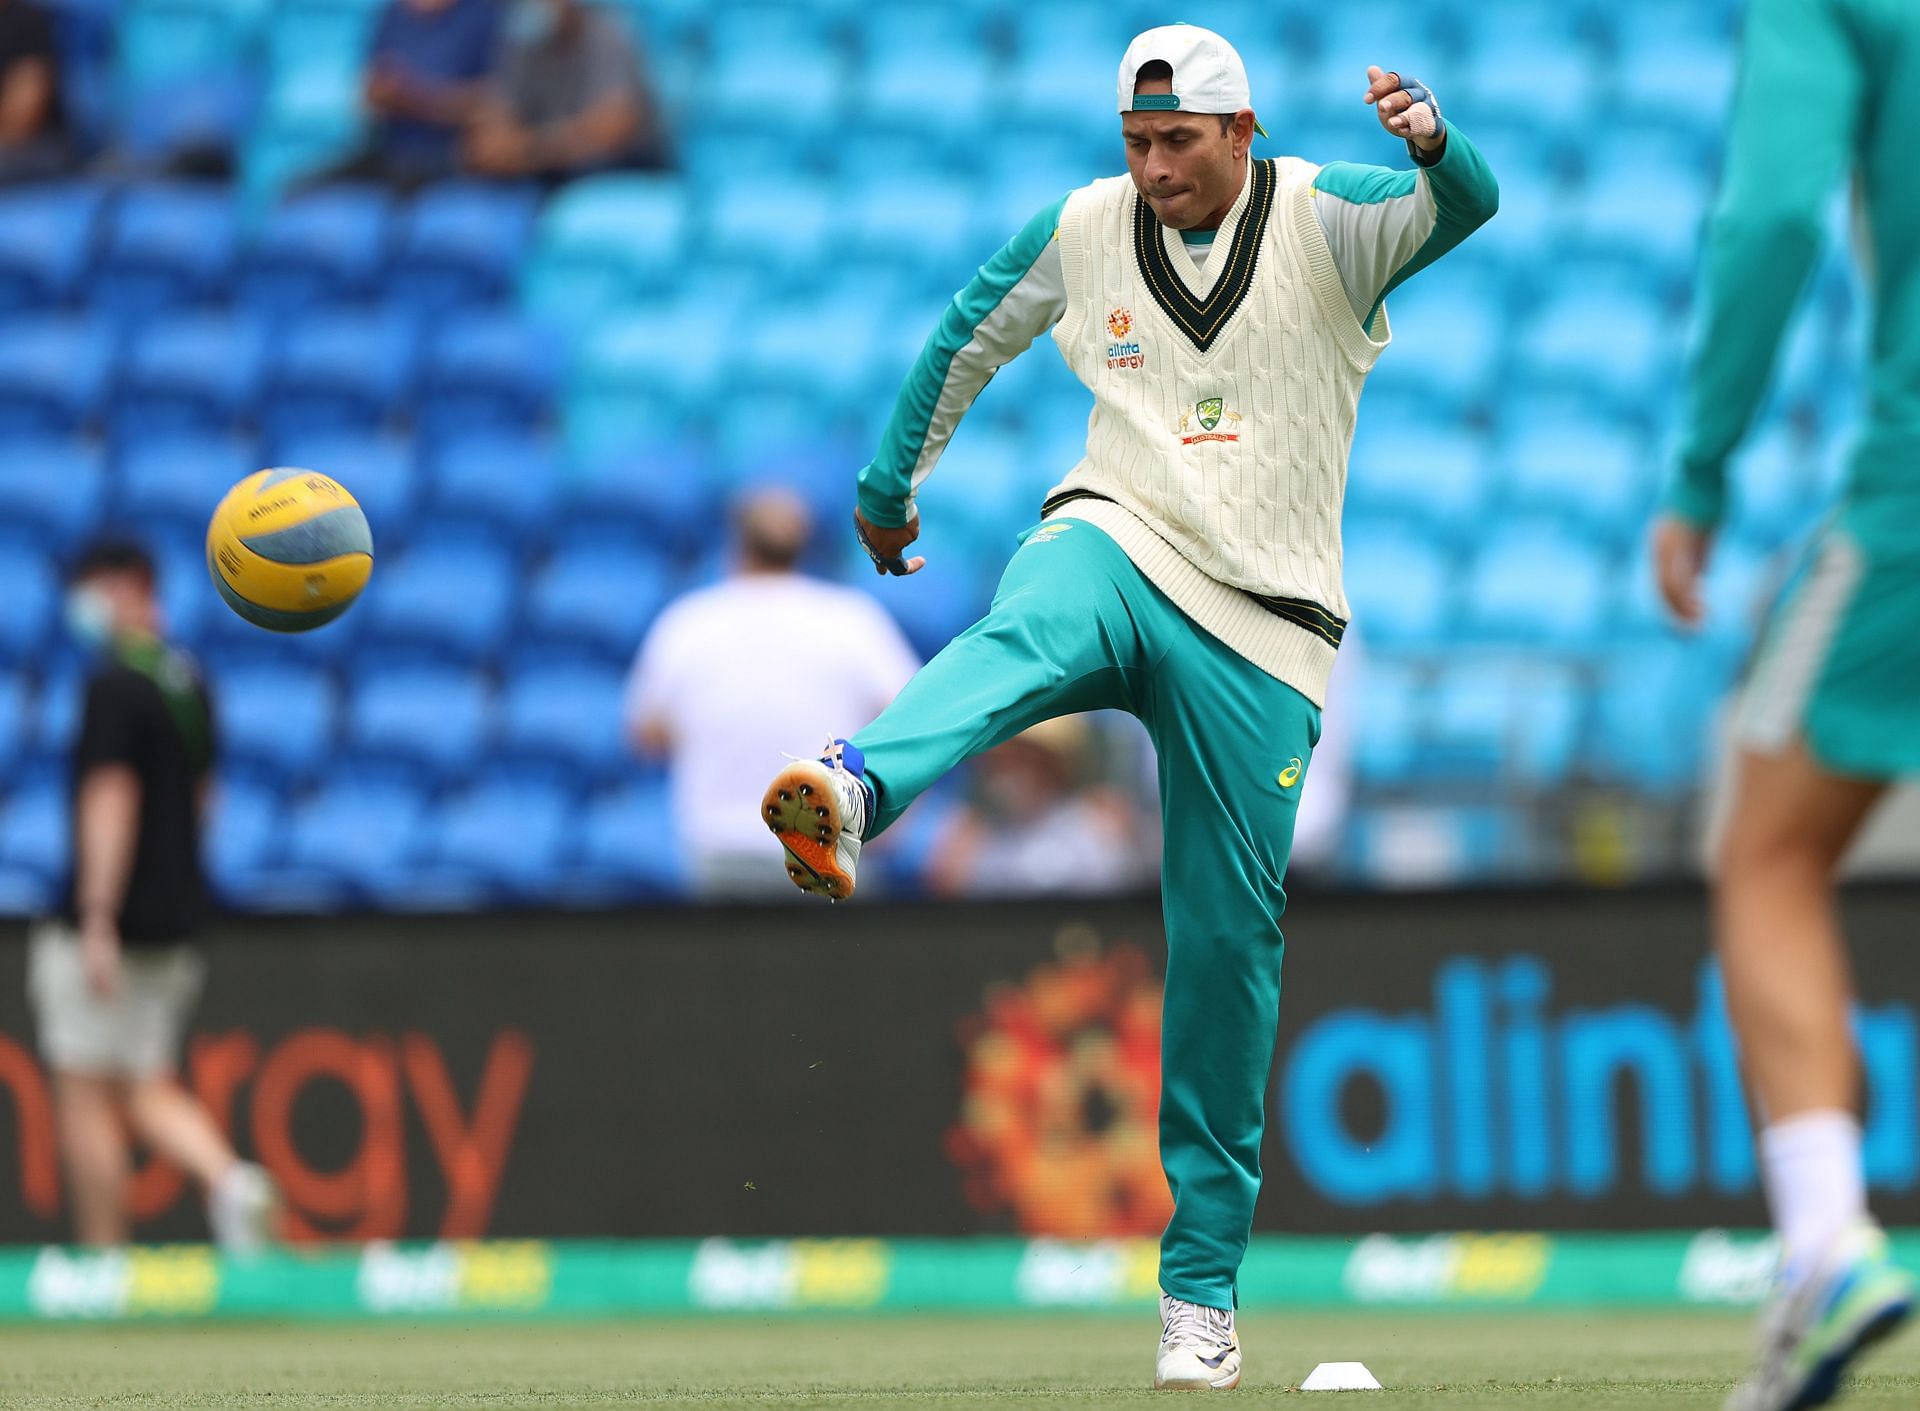 Usman did not play a single Test in 2020 and 2021 (Image Courtesy: Getty Images)